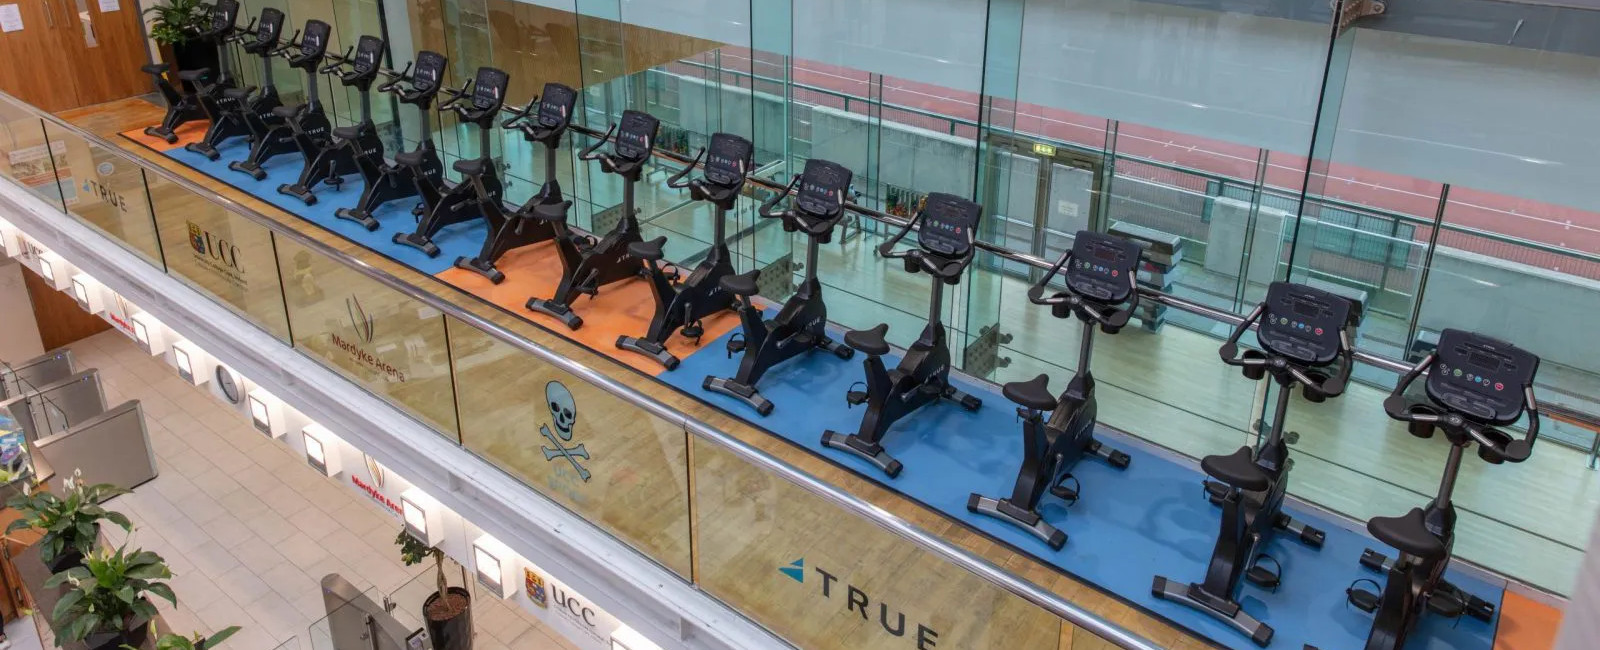 cycling machines on a glass balcony at the mardyke arena